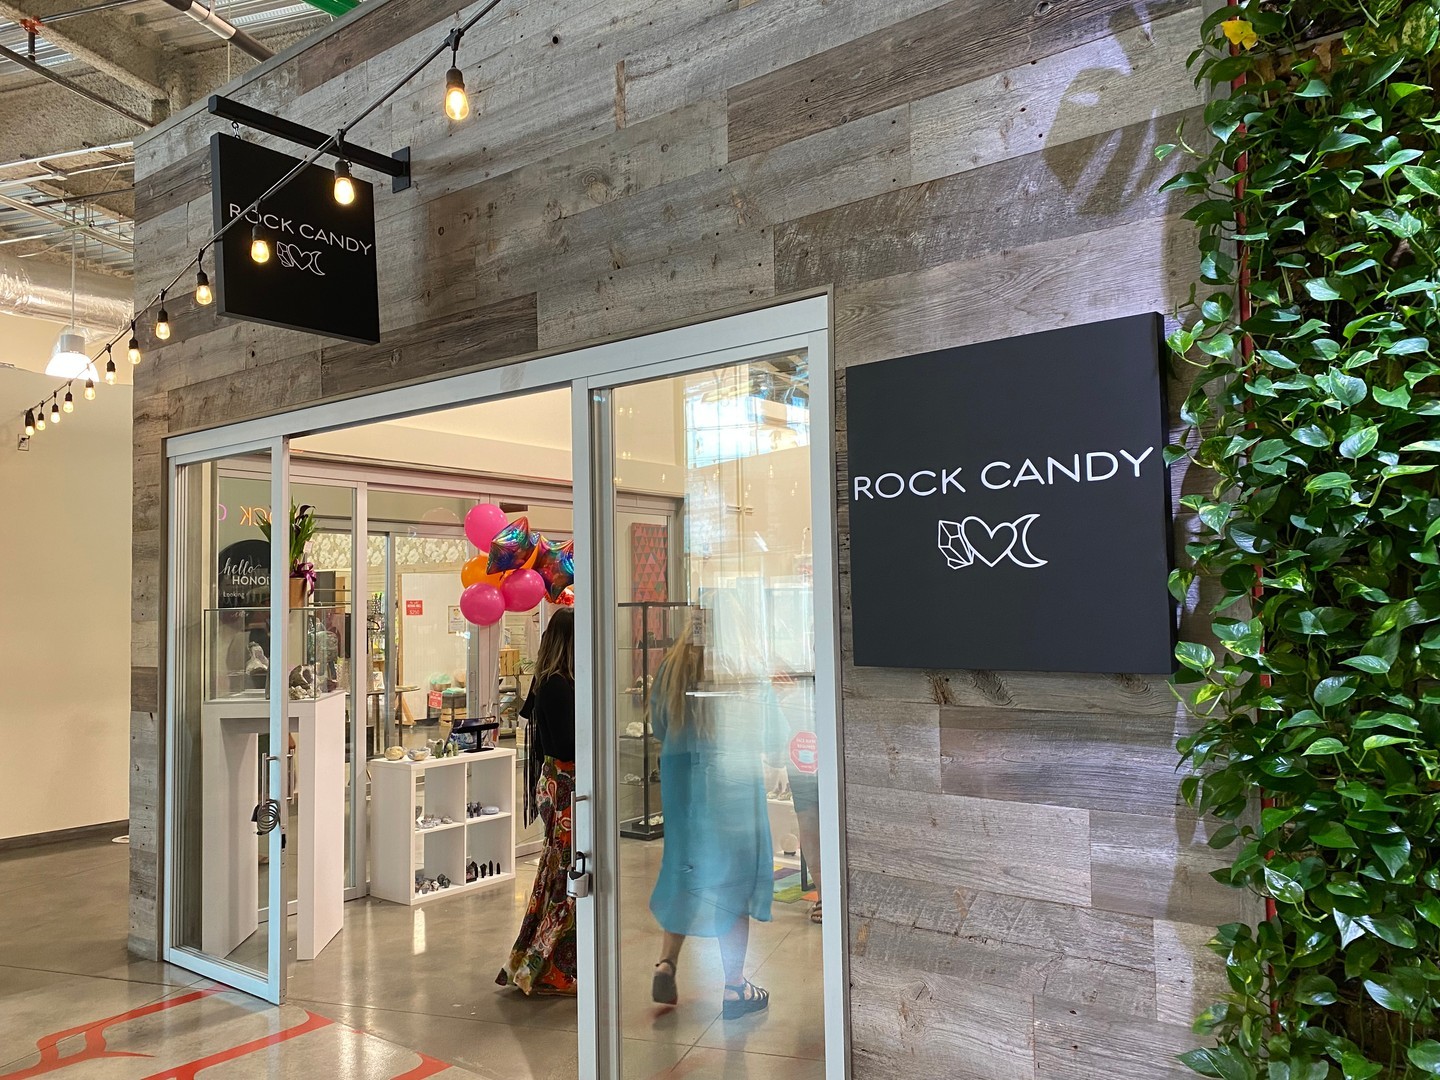 Join us in welcoming Rock Candy Hawaii to South Shore Market! Visit this one-of-a-kind boutique to find a curated selection of self-care essentials for your mind, body and space.